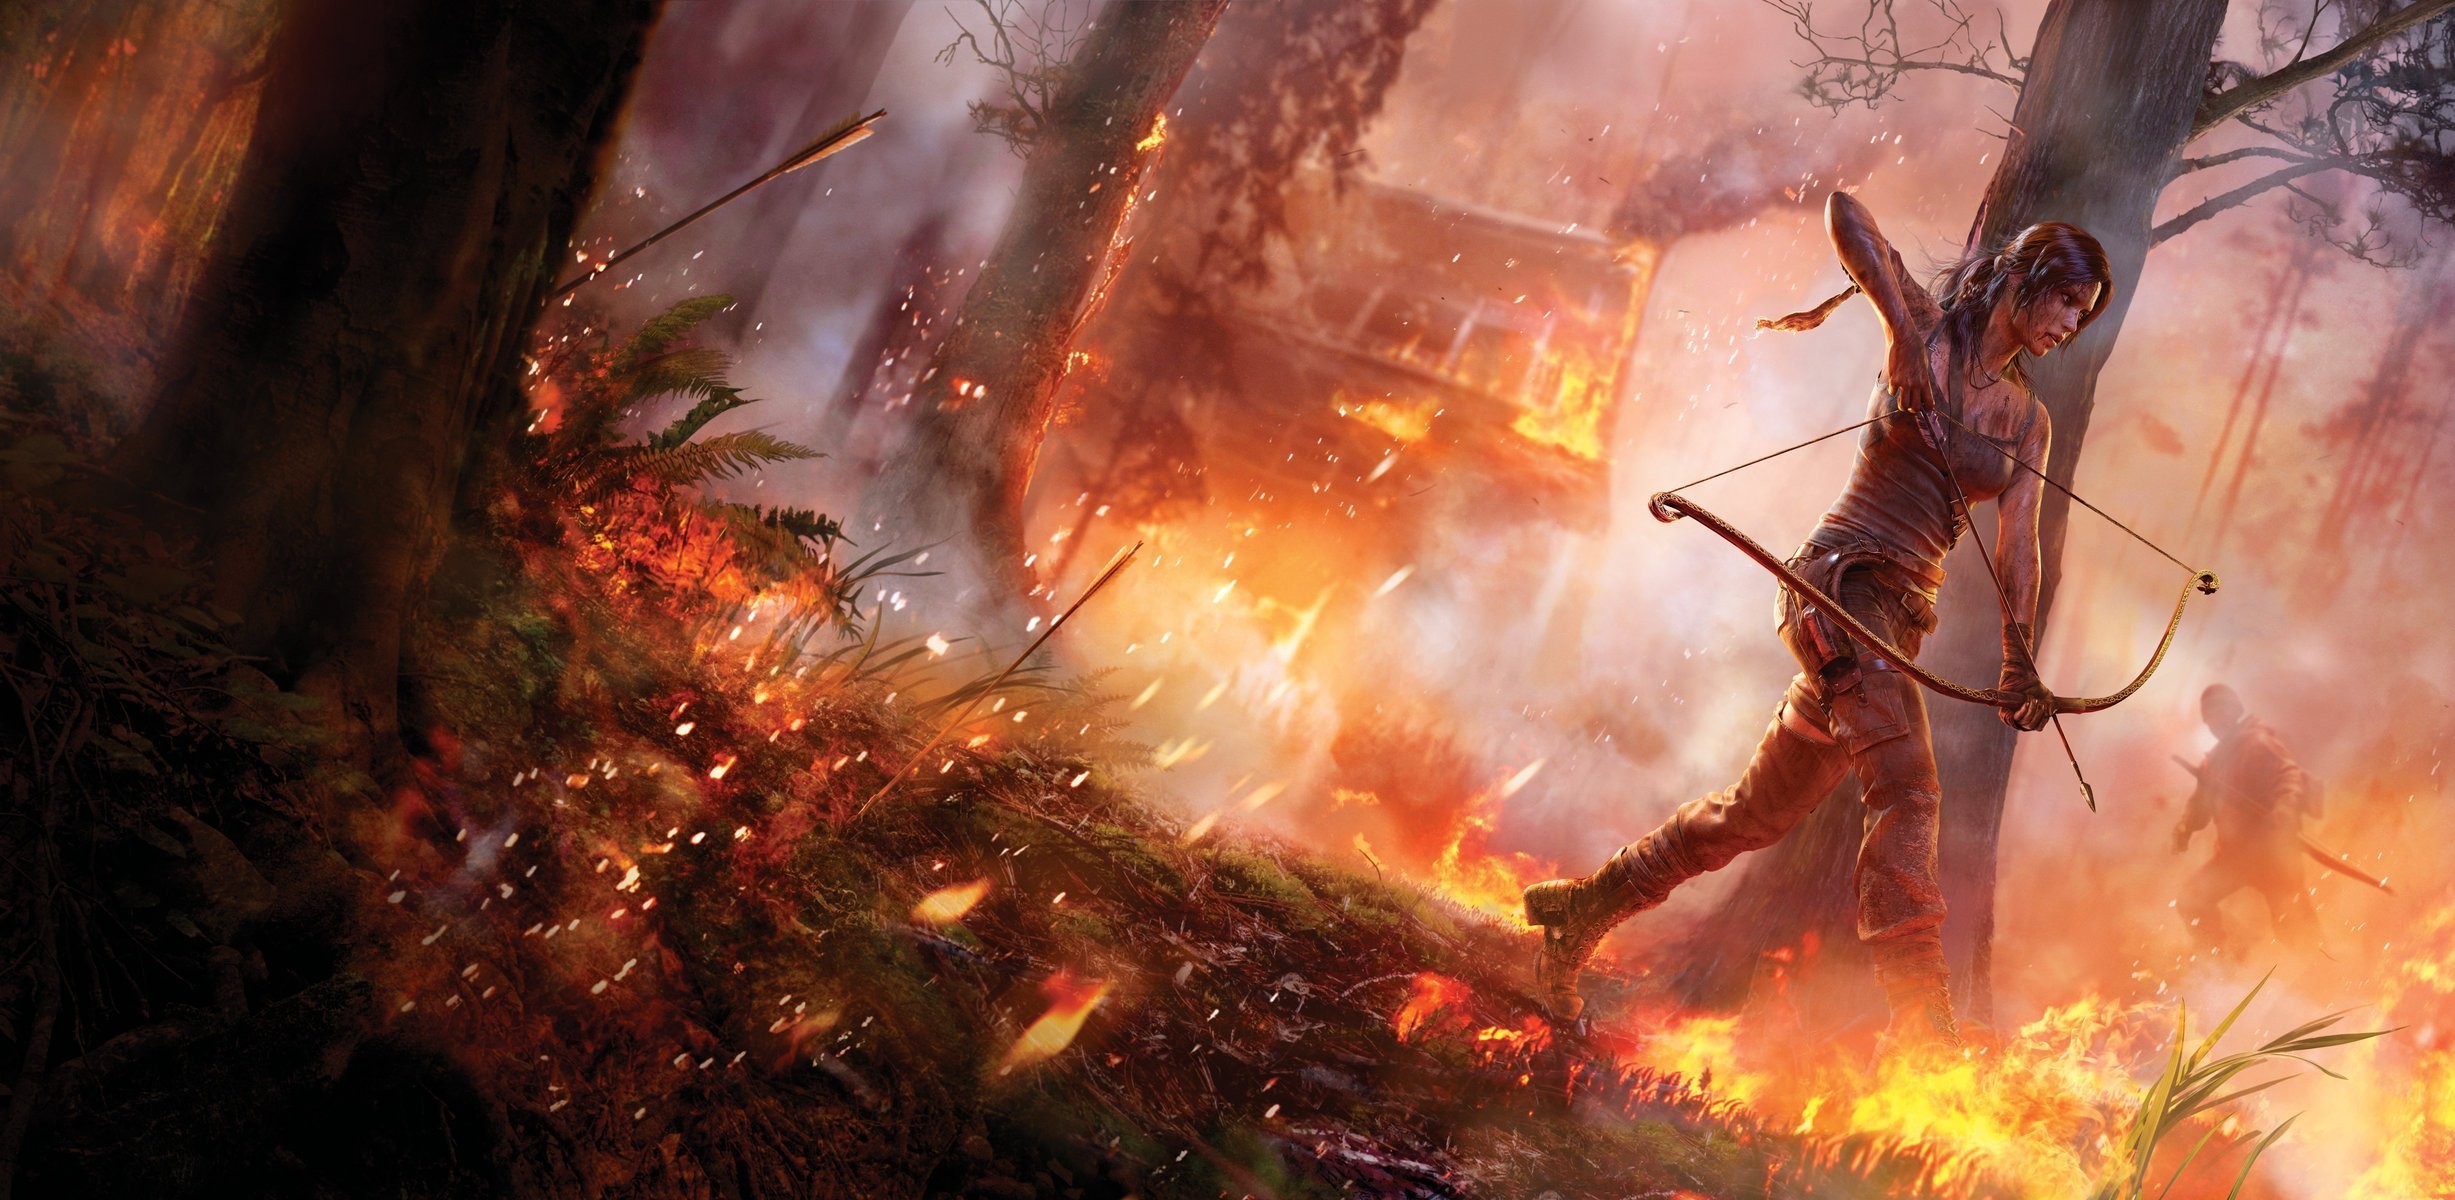 2455x1200 tomb raider tomb raider girl forest fire house meadow tree grass